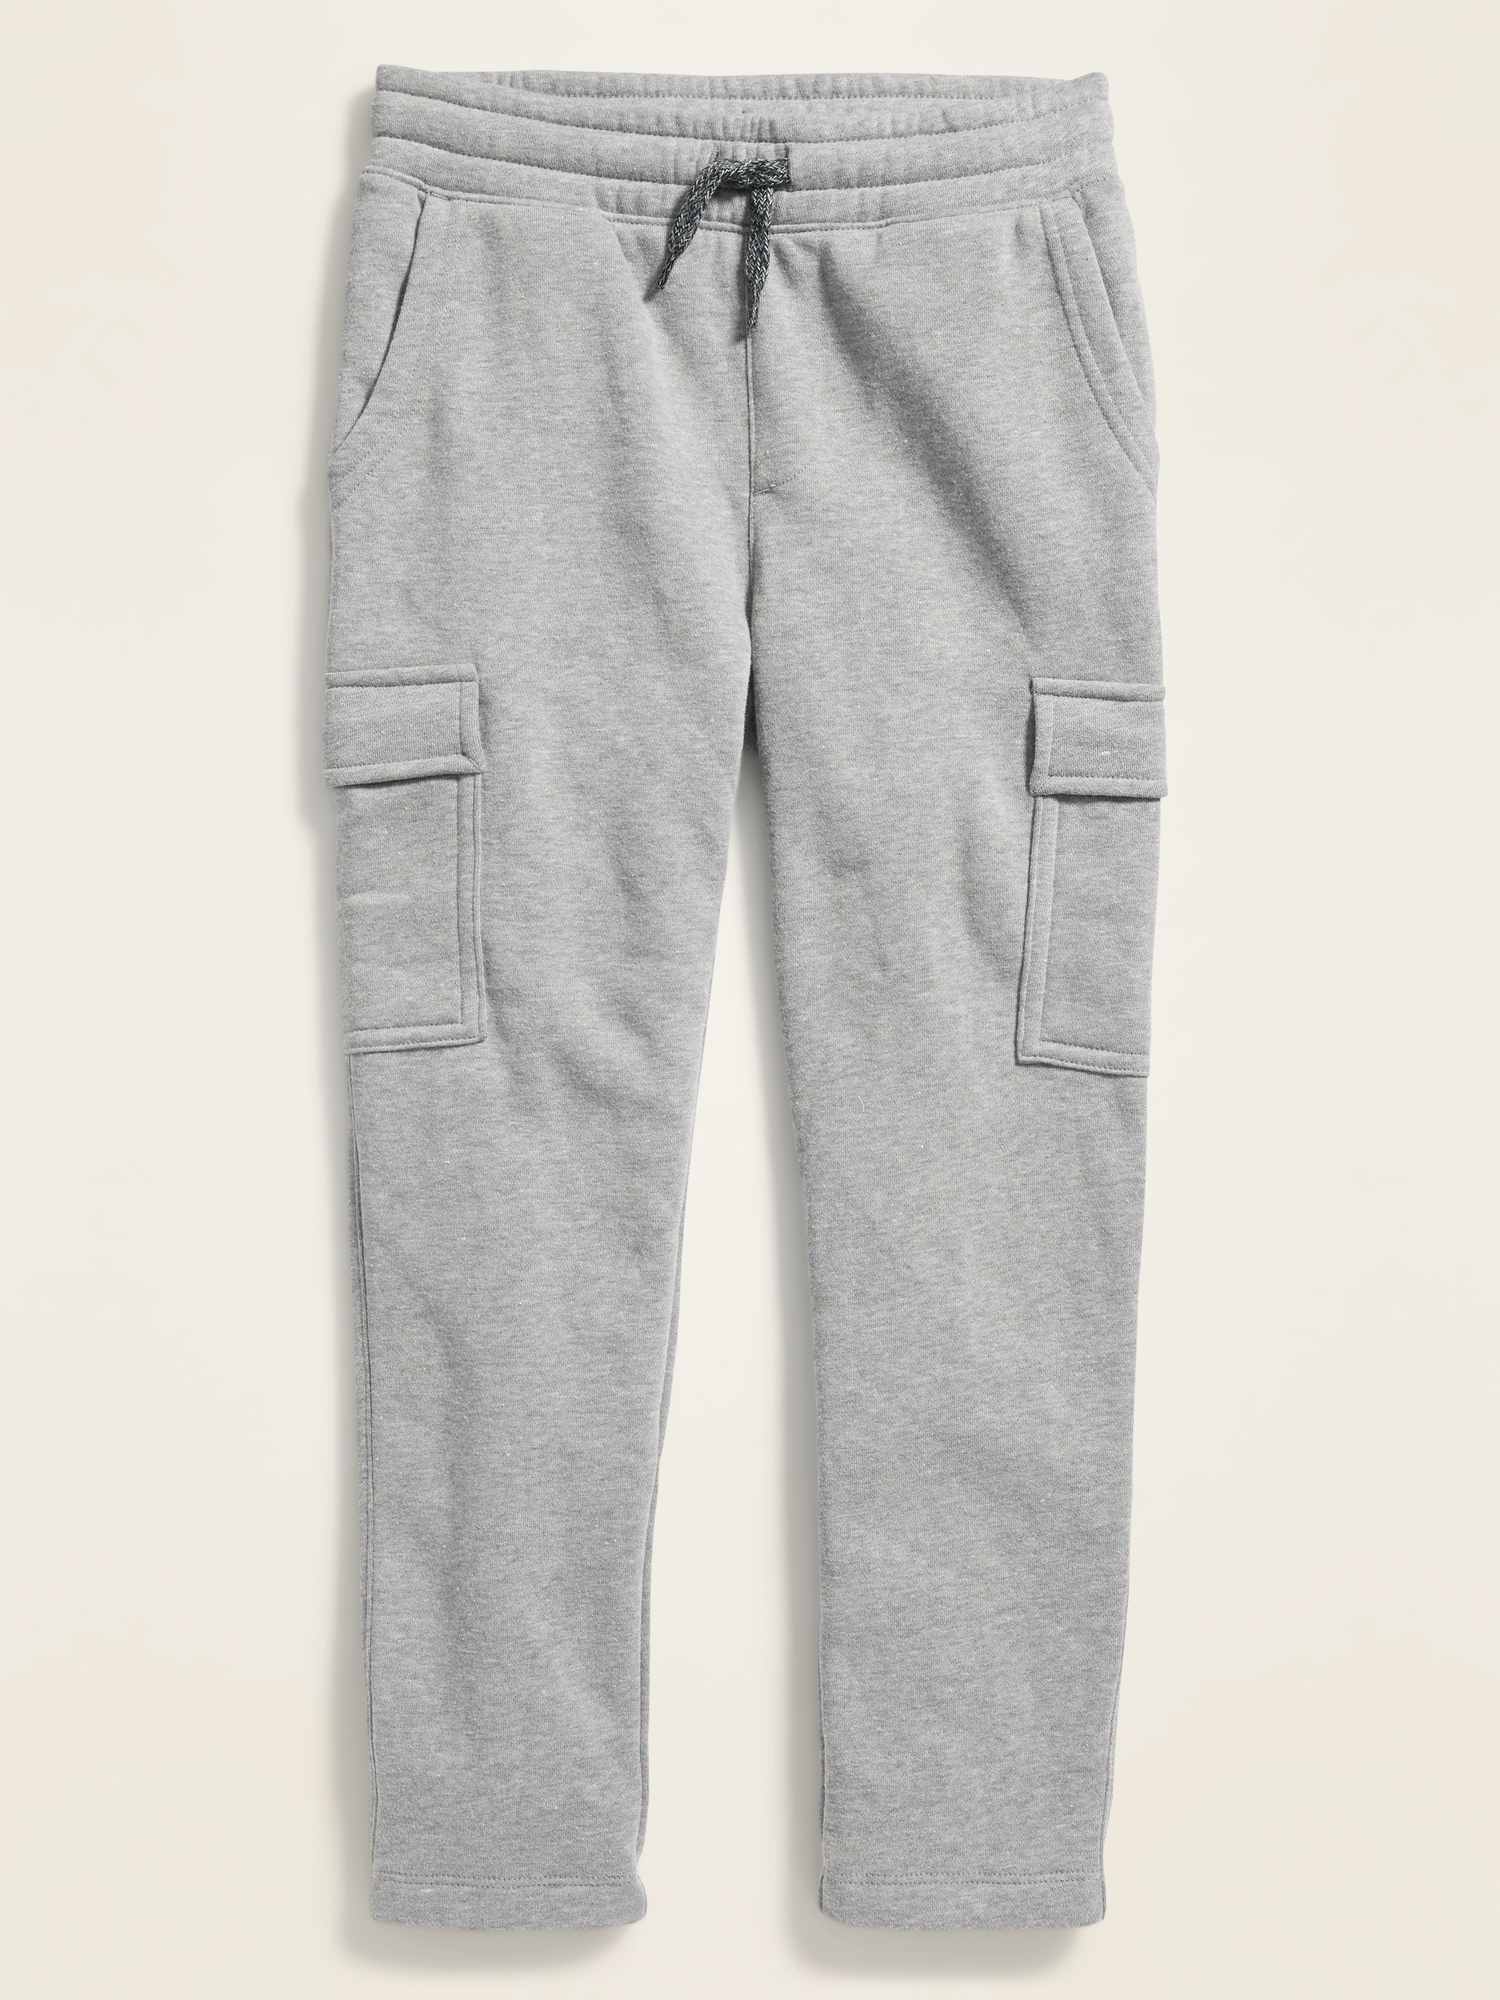 Navy Sweatpants Boys Old Tapered | For Cargo